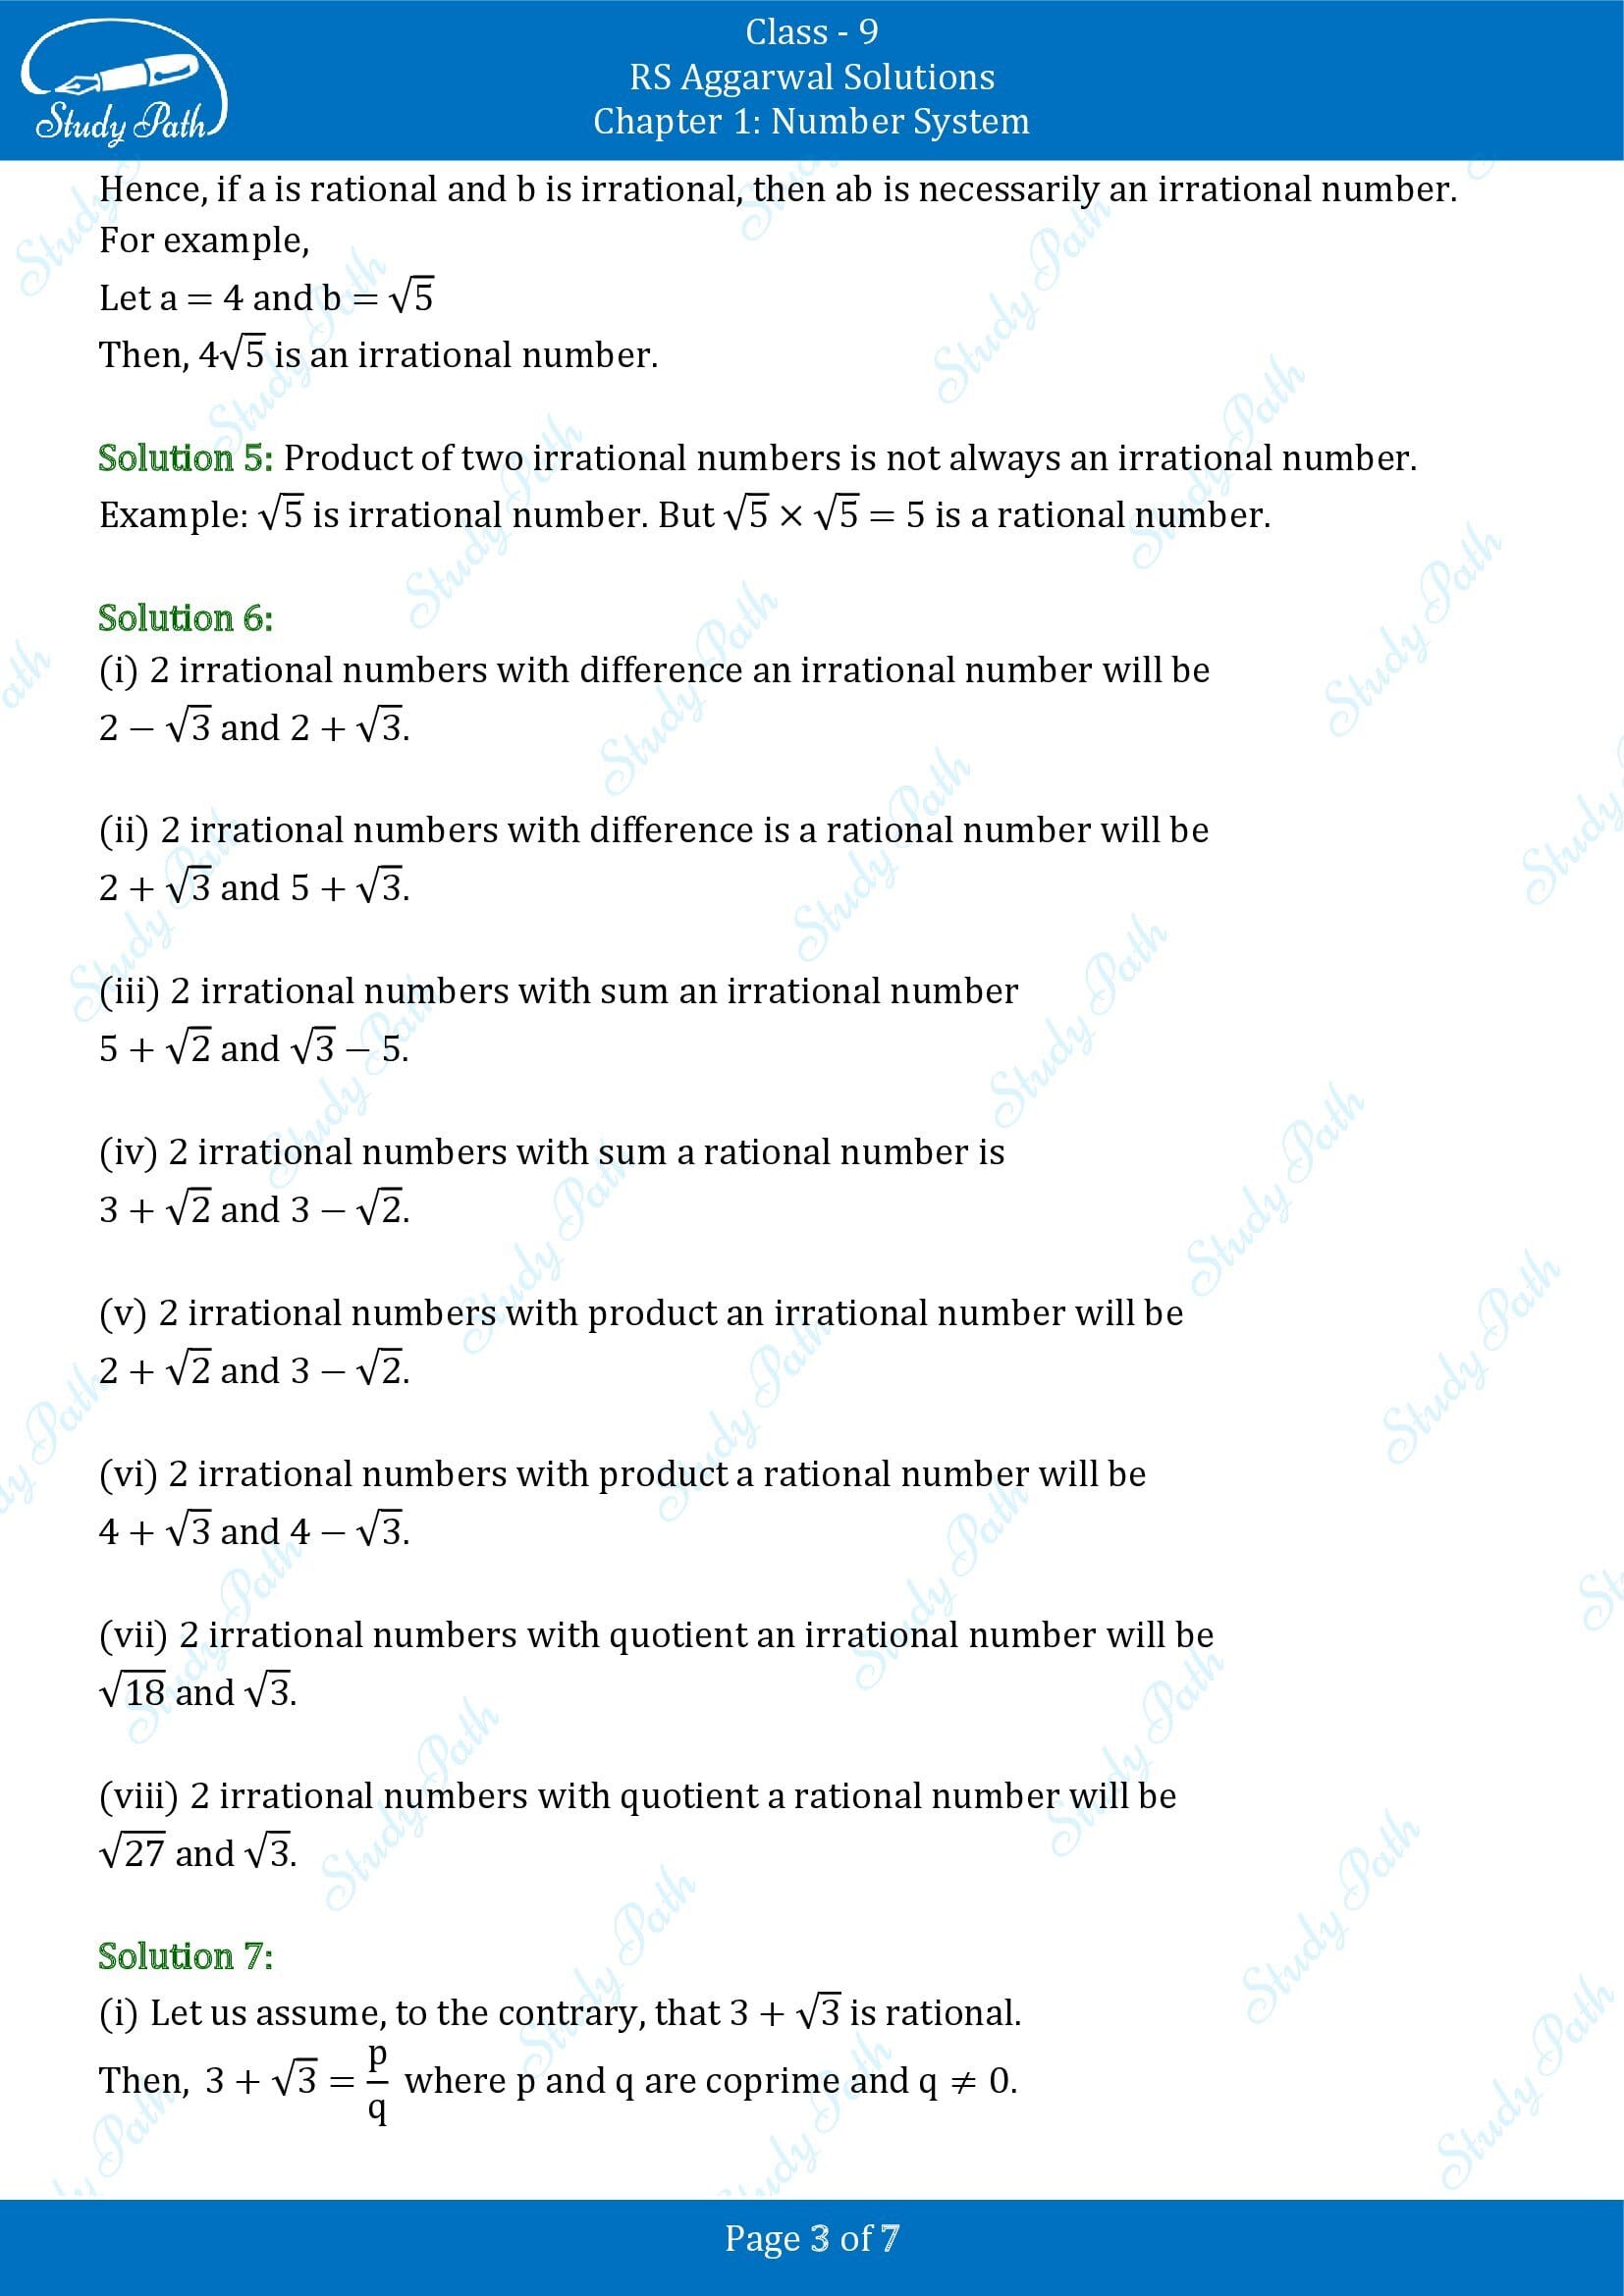 RS Aggarwal Solutions Class 9 Chapter 1 Number System Exercise 1C 00003